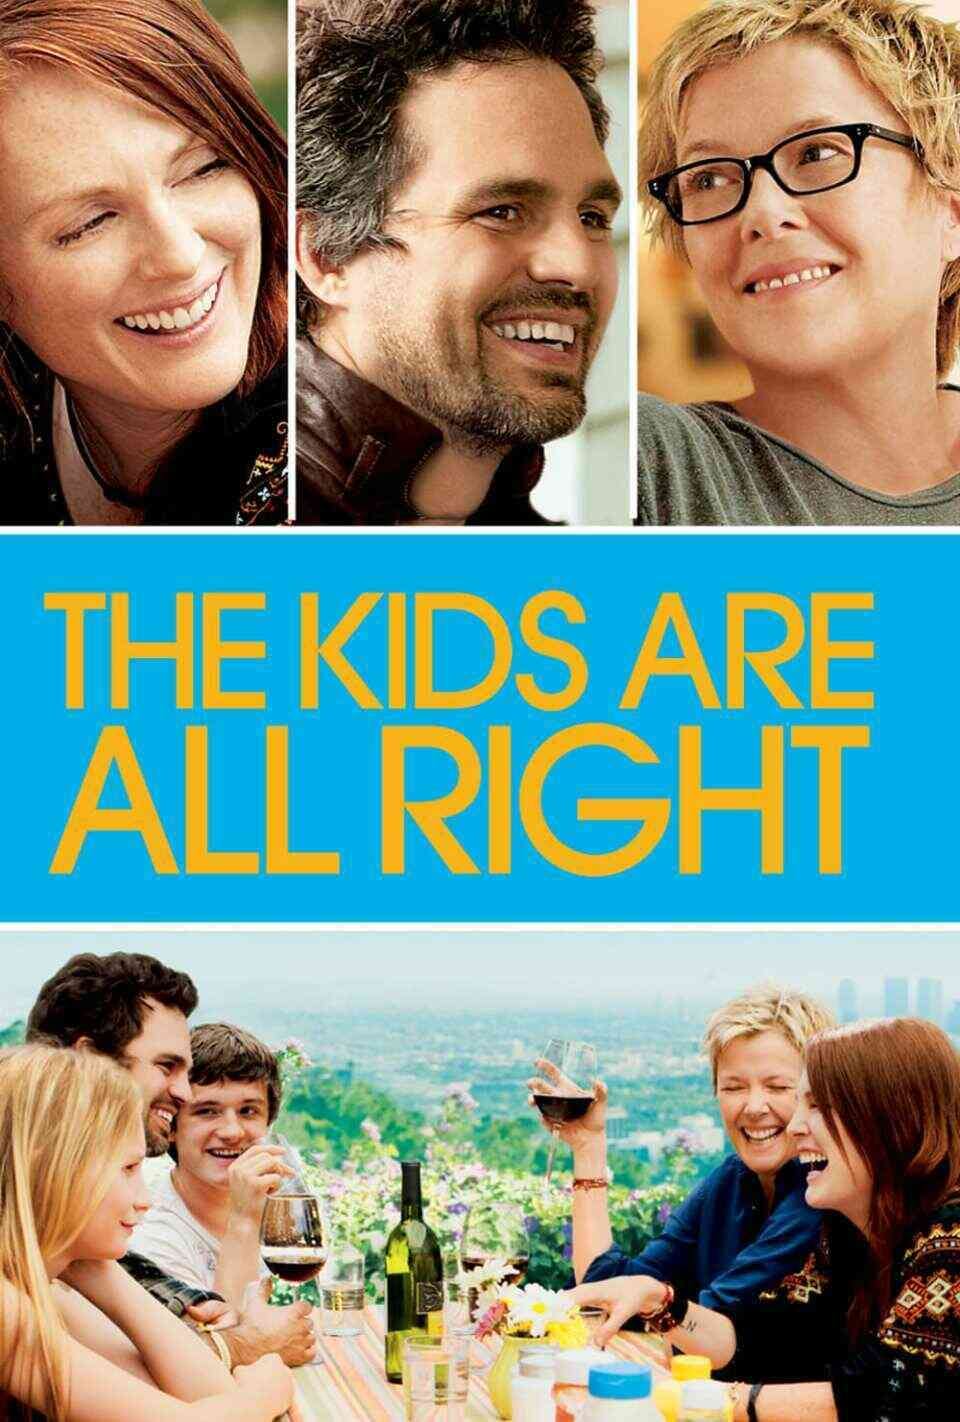 Read The Kids Are All Right screenplay (poster)